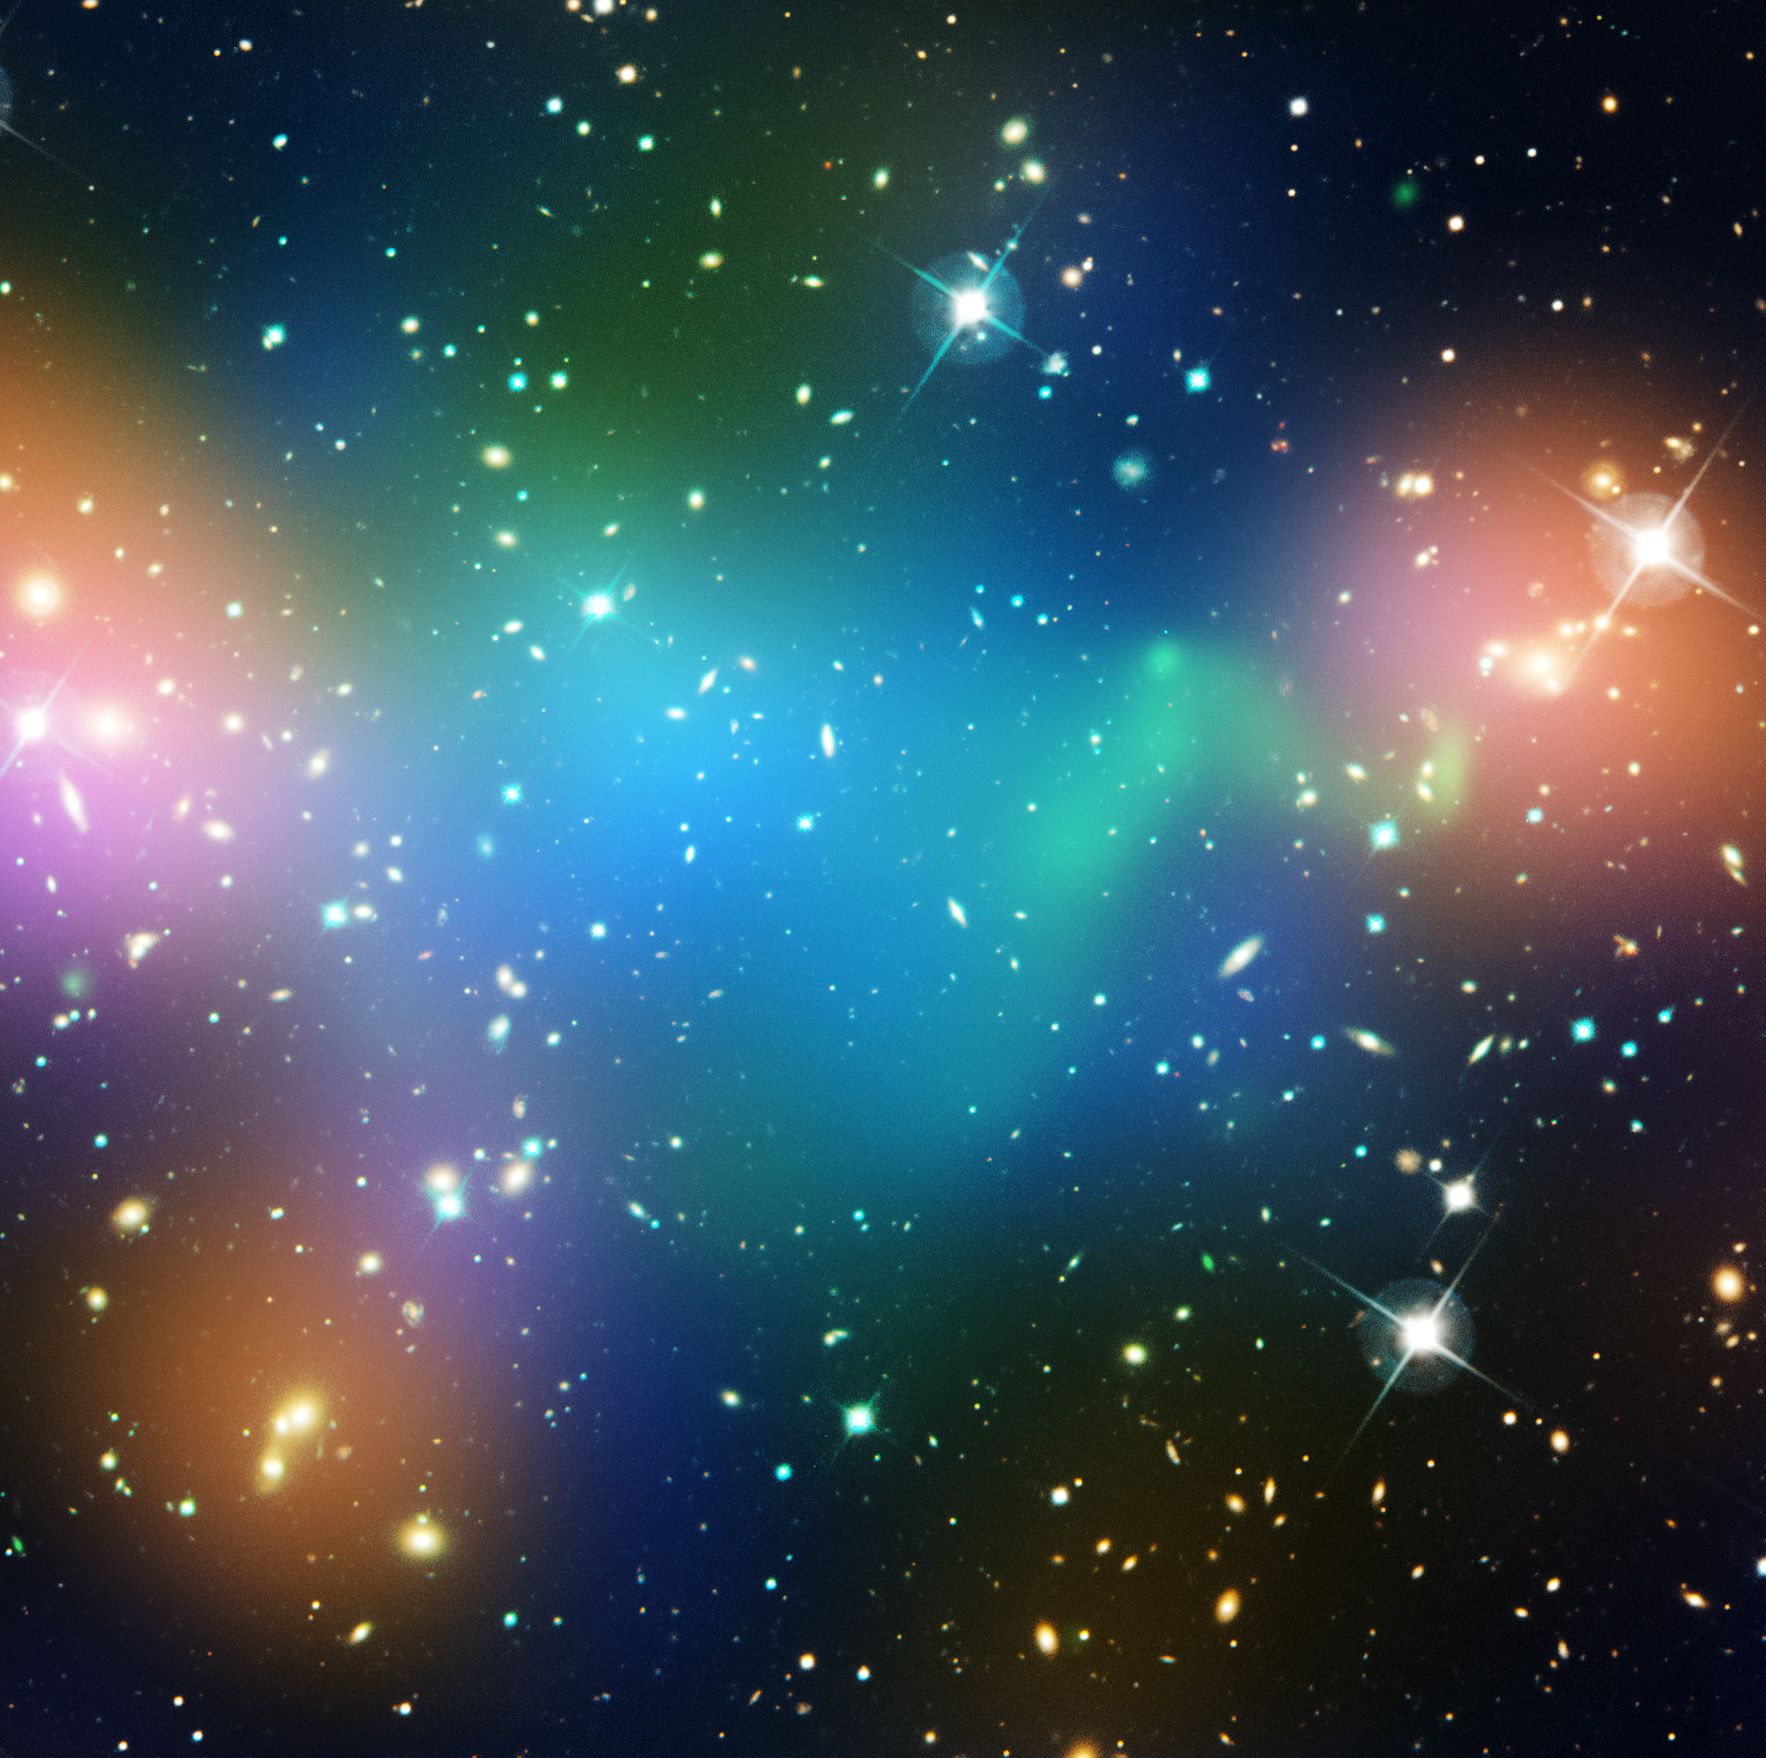 We Just Mapped Out Dark Matter With Radiation From the Big Bang